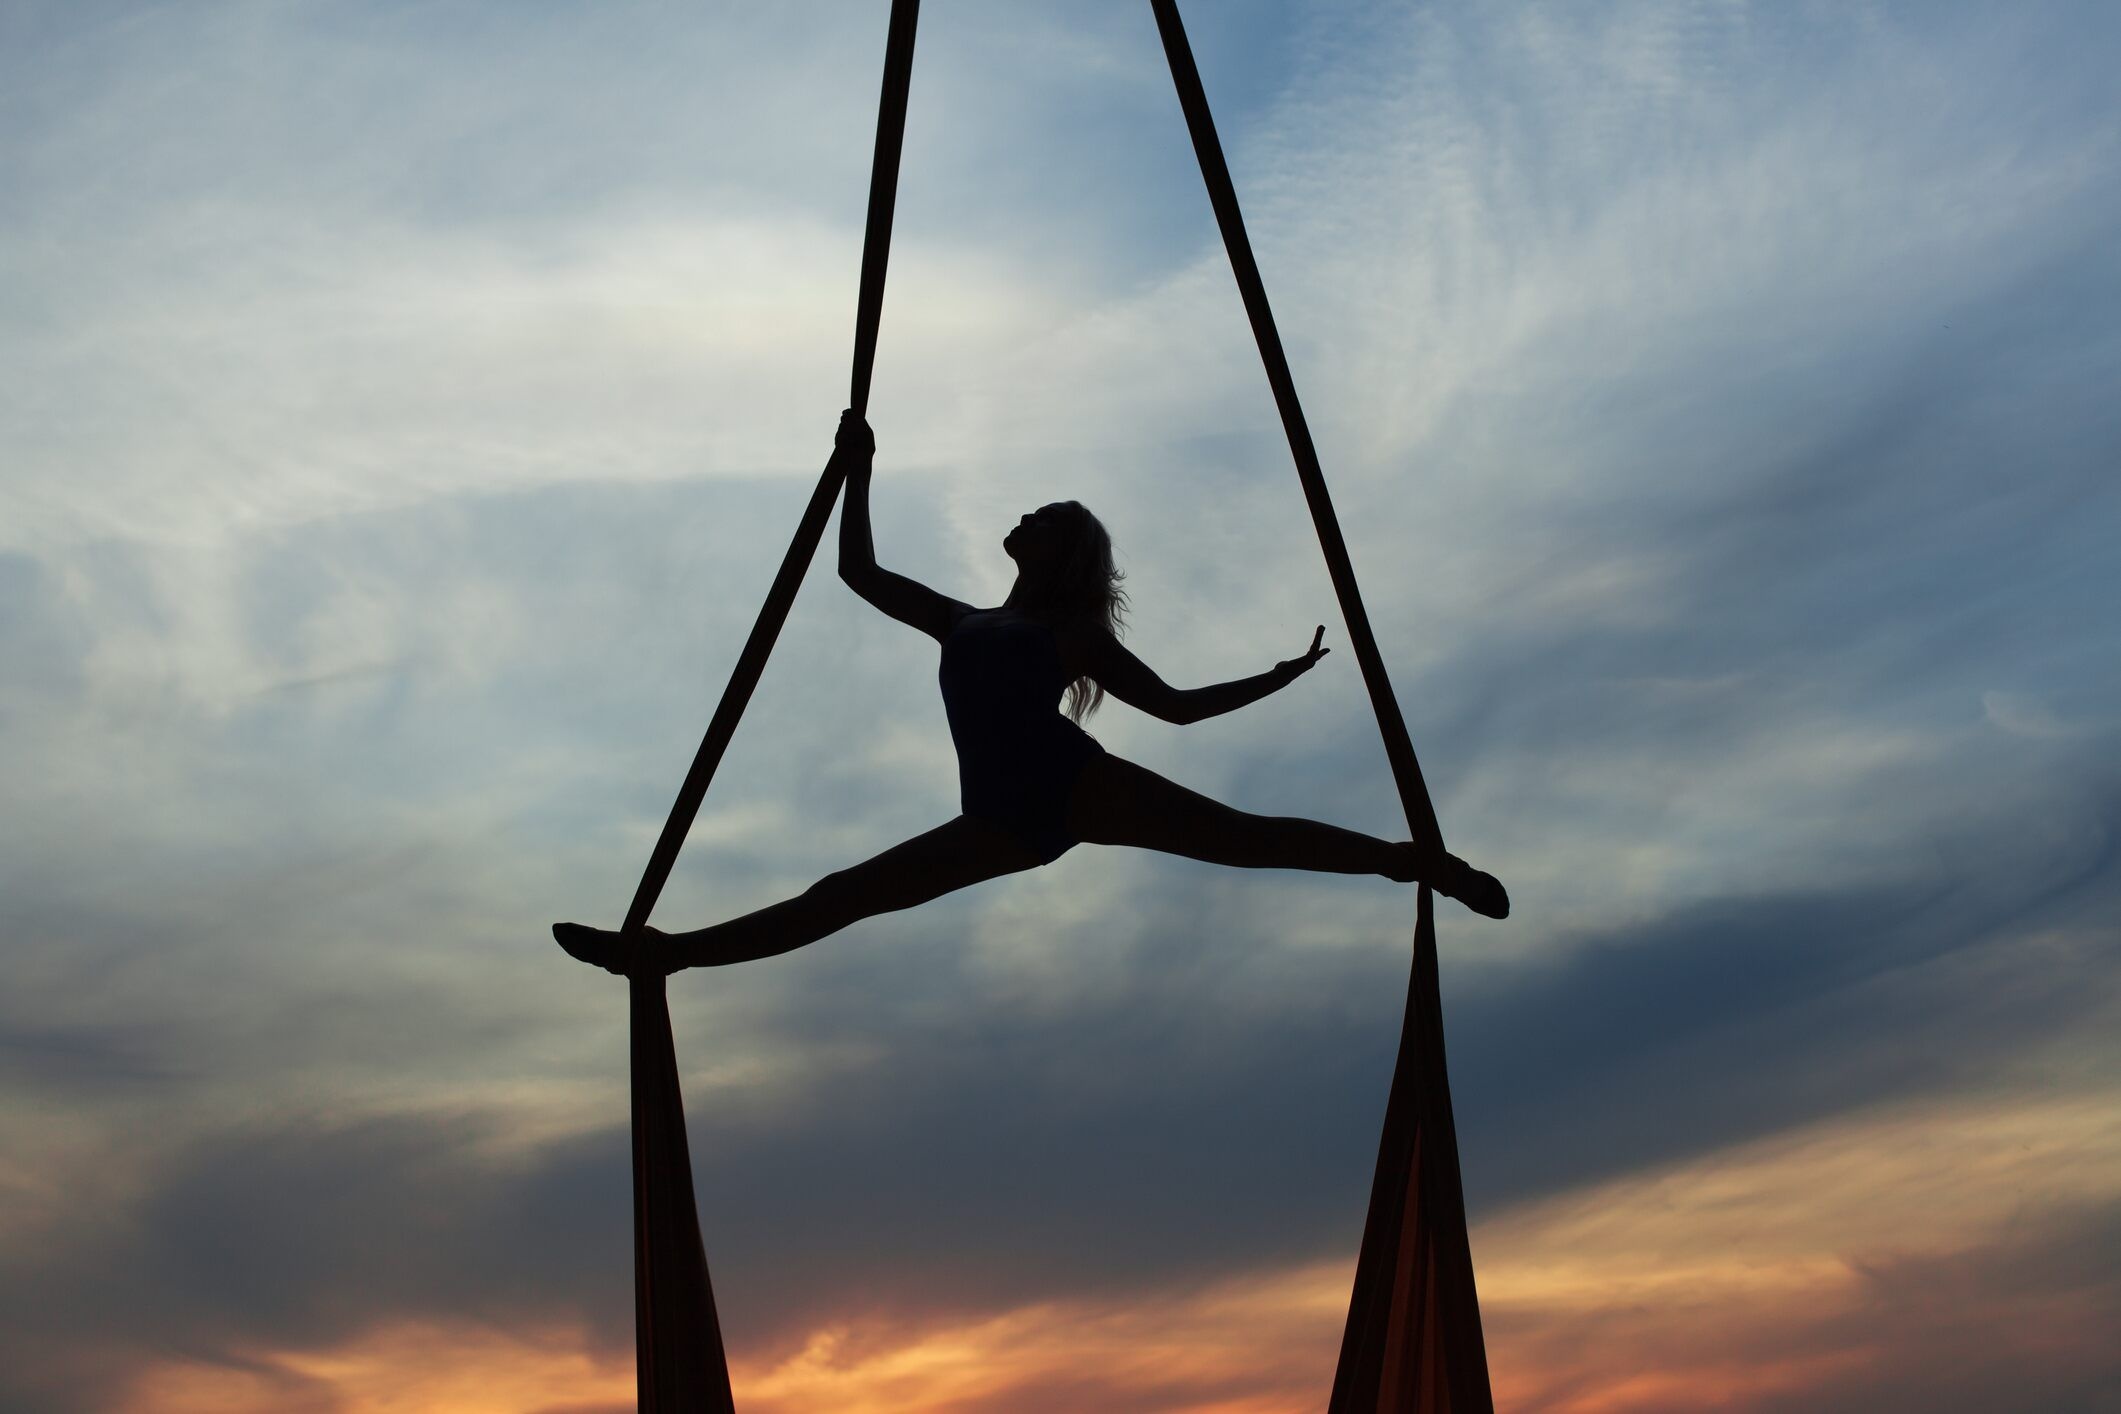 Aerial Silks: An artistic acrobatics performance without safety lines during the sunset. 2130x1420 HD Wallpaper.